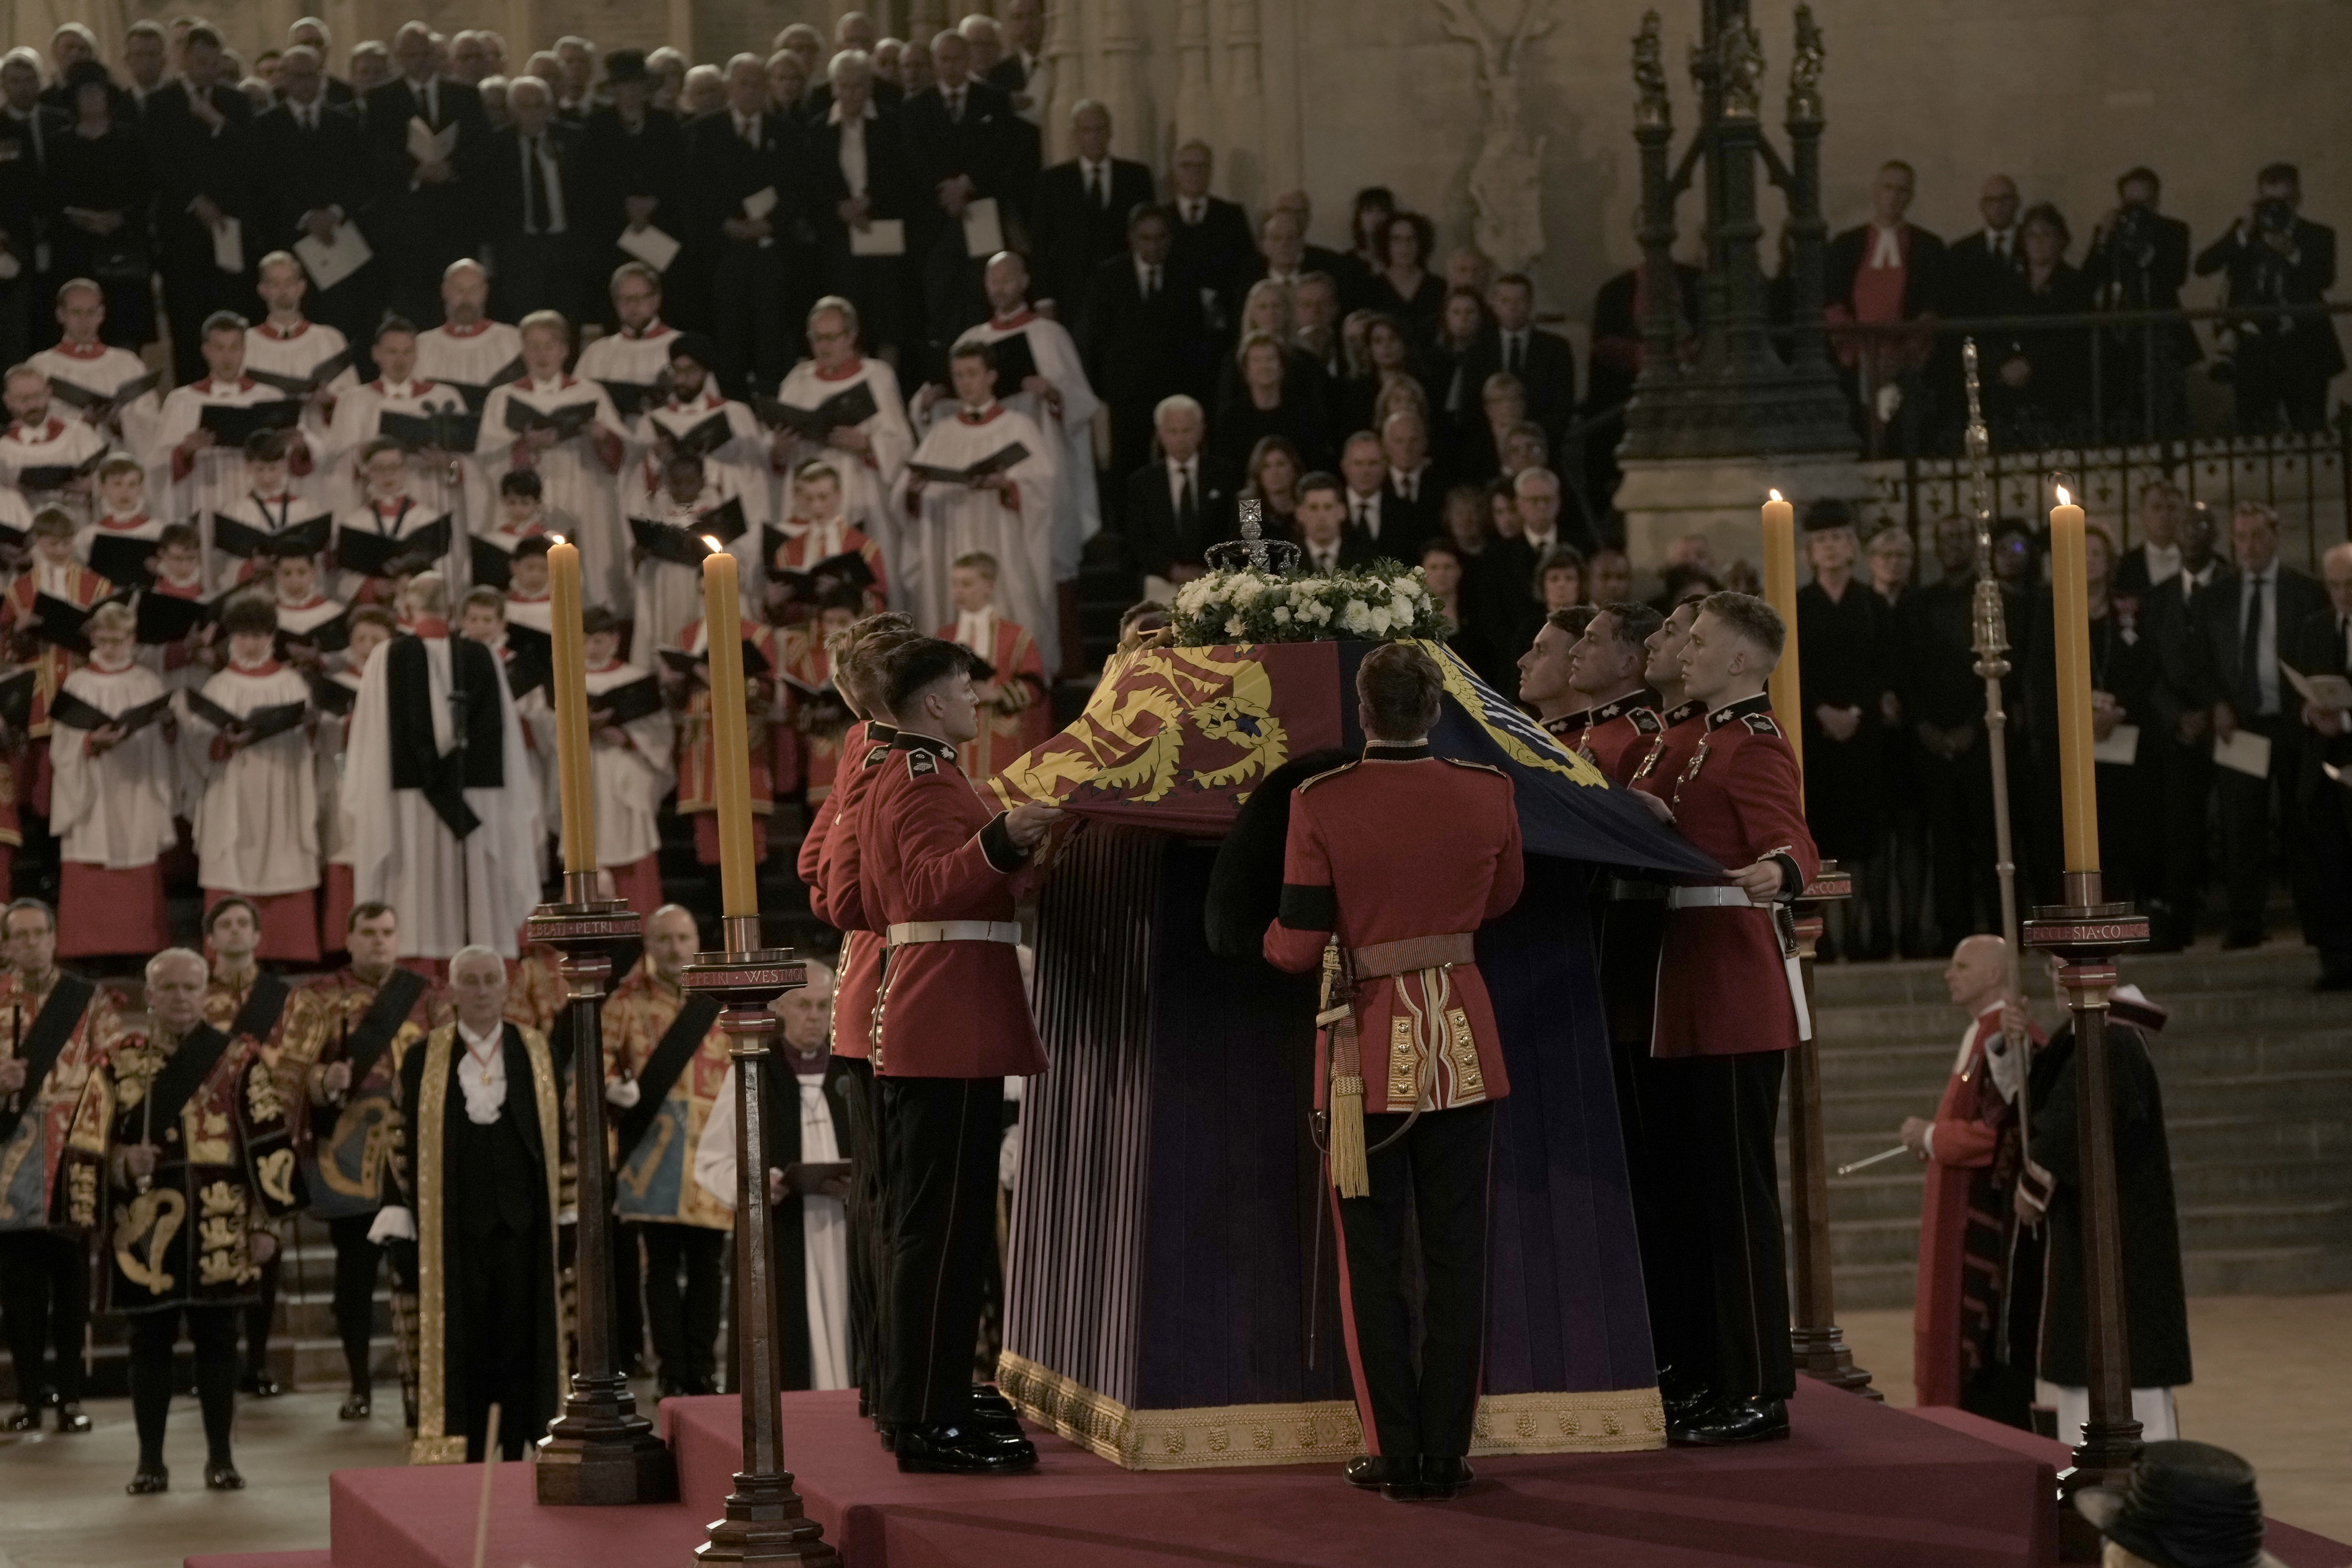 As the House of Commons returns to mourn the queen’s death, here’s what to expect